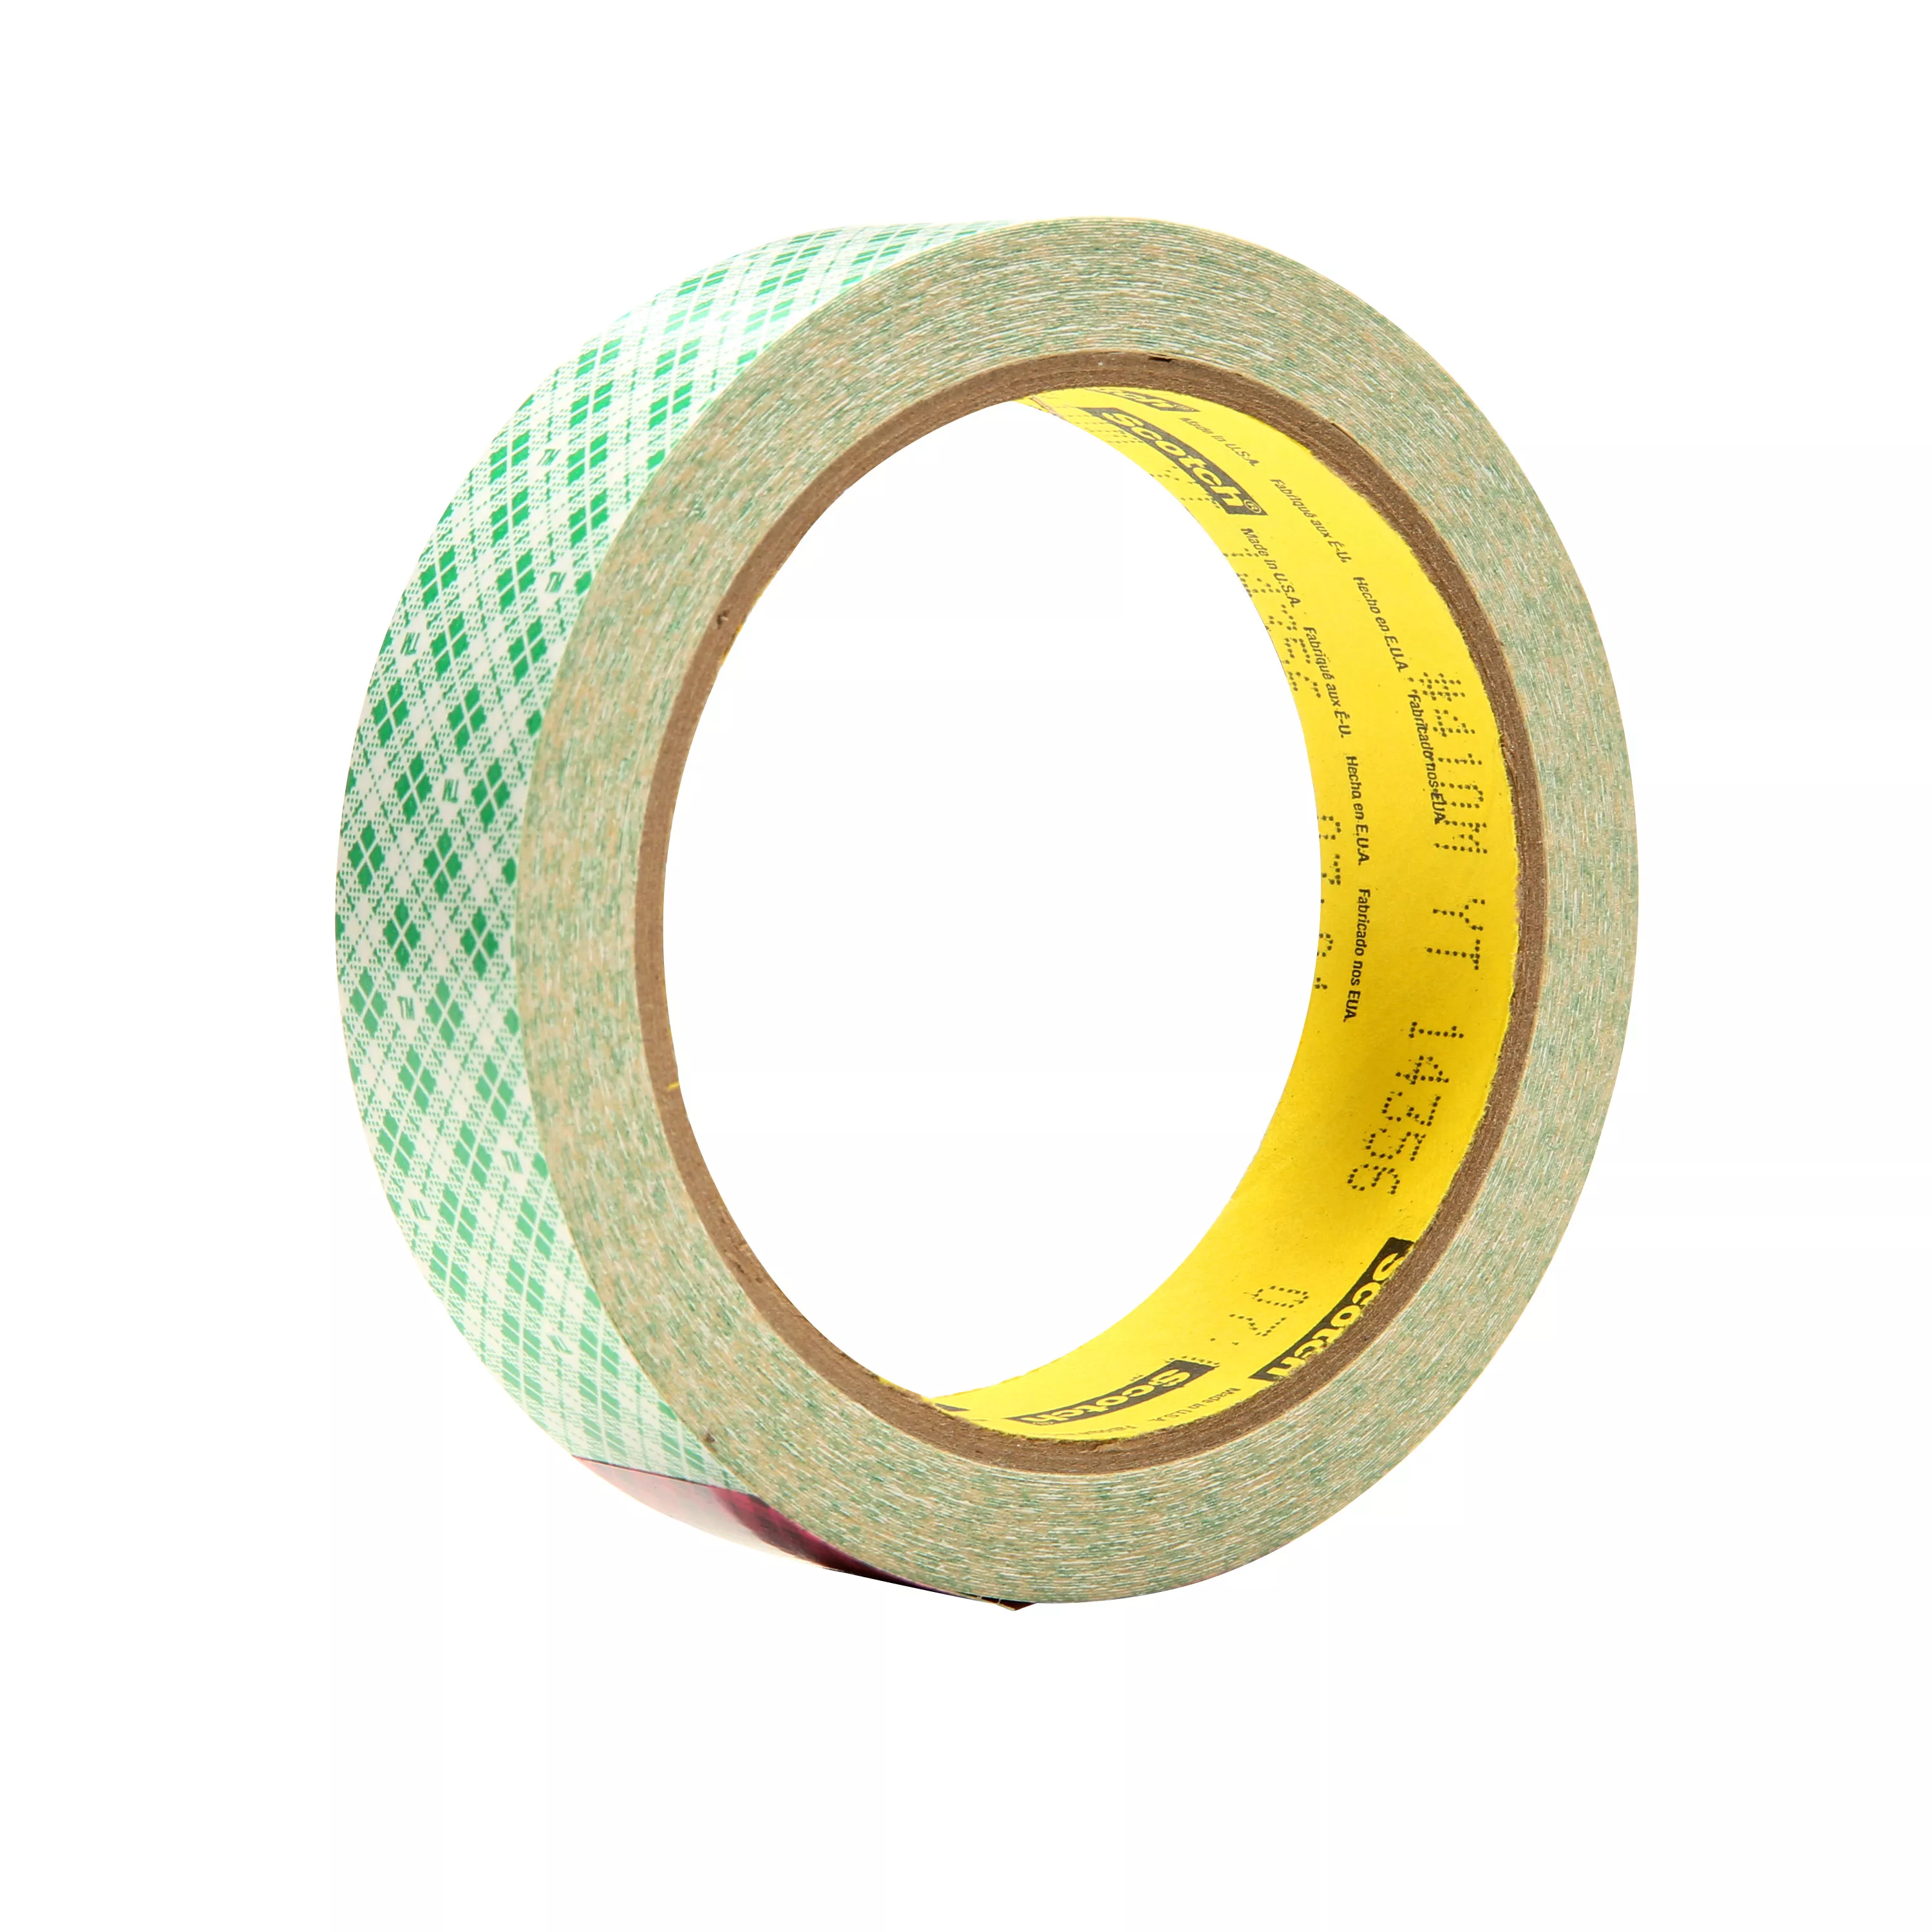 3M™ Double Coated Paper Tape 410M, Natural, 1 in x 10 yd, 5 mil, 36
rolls per case